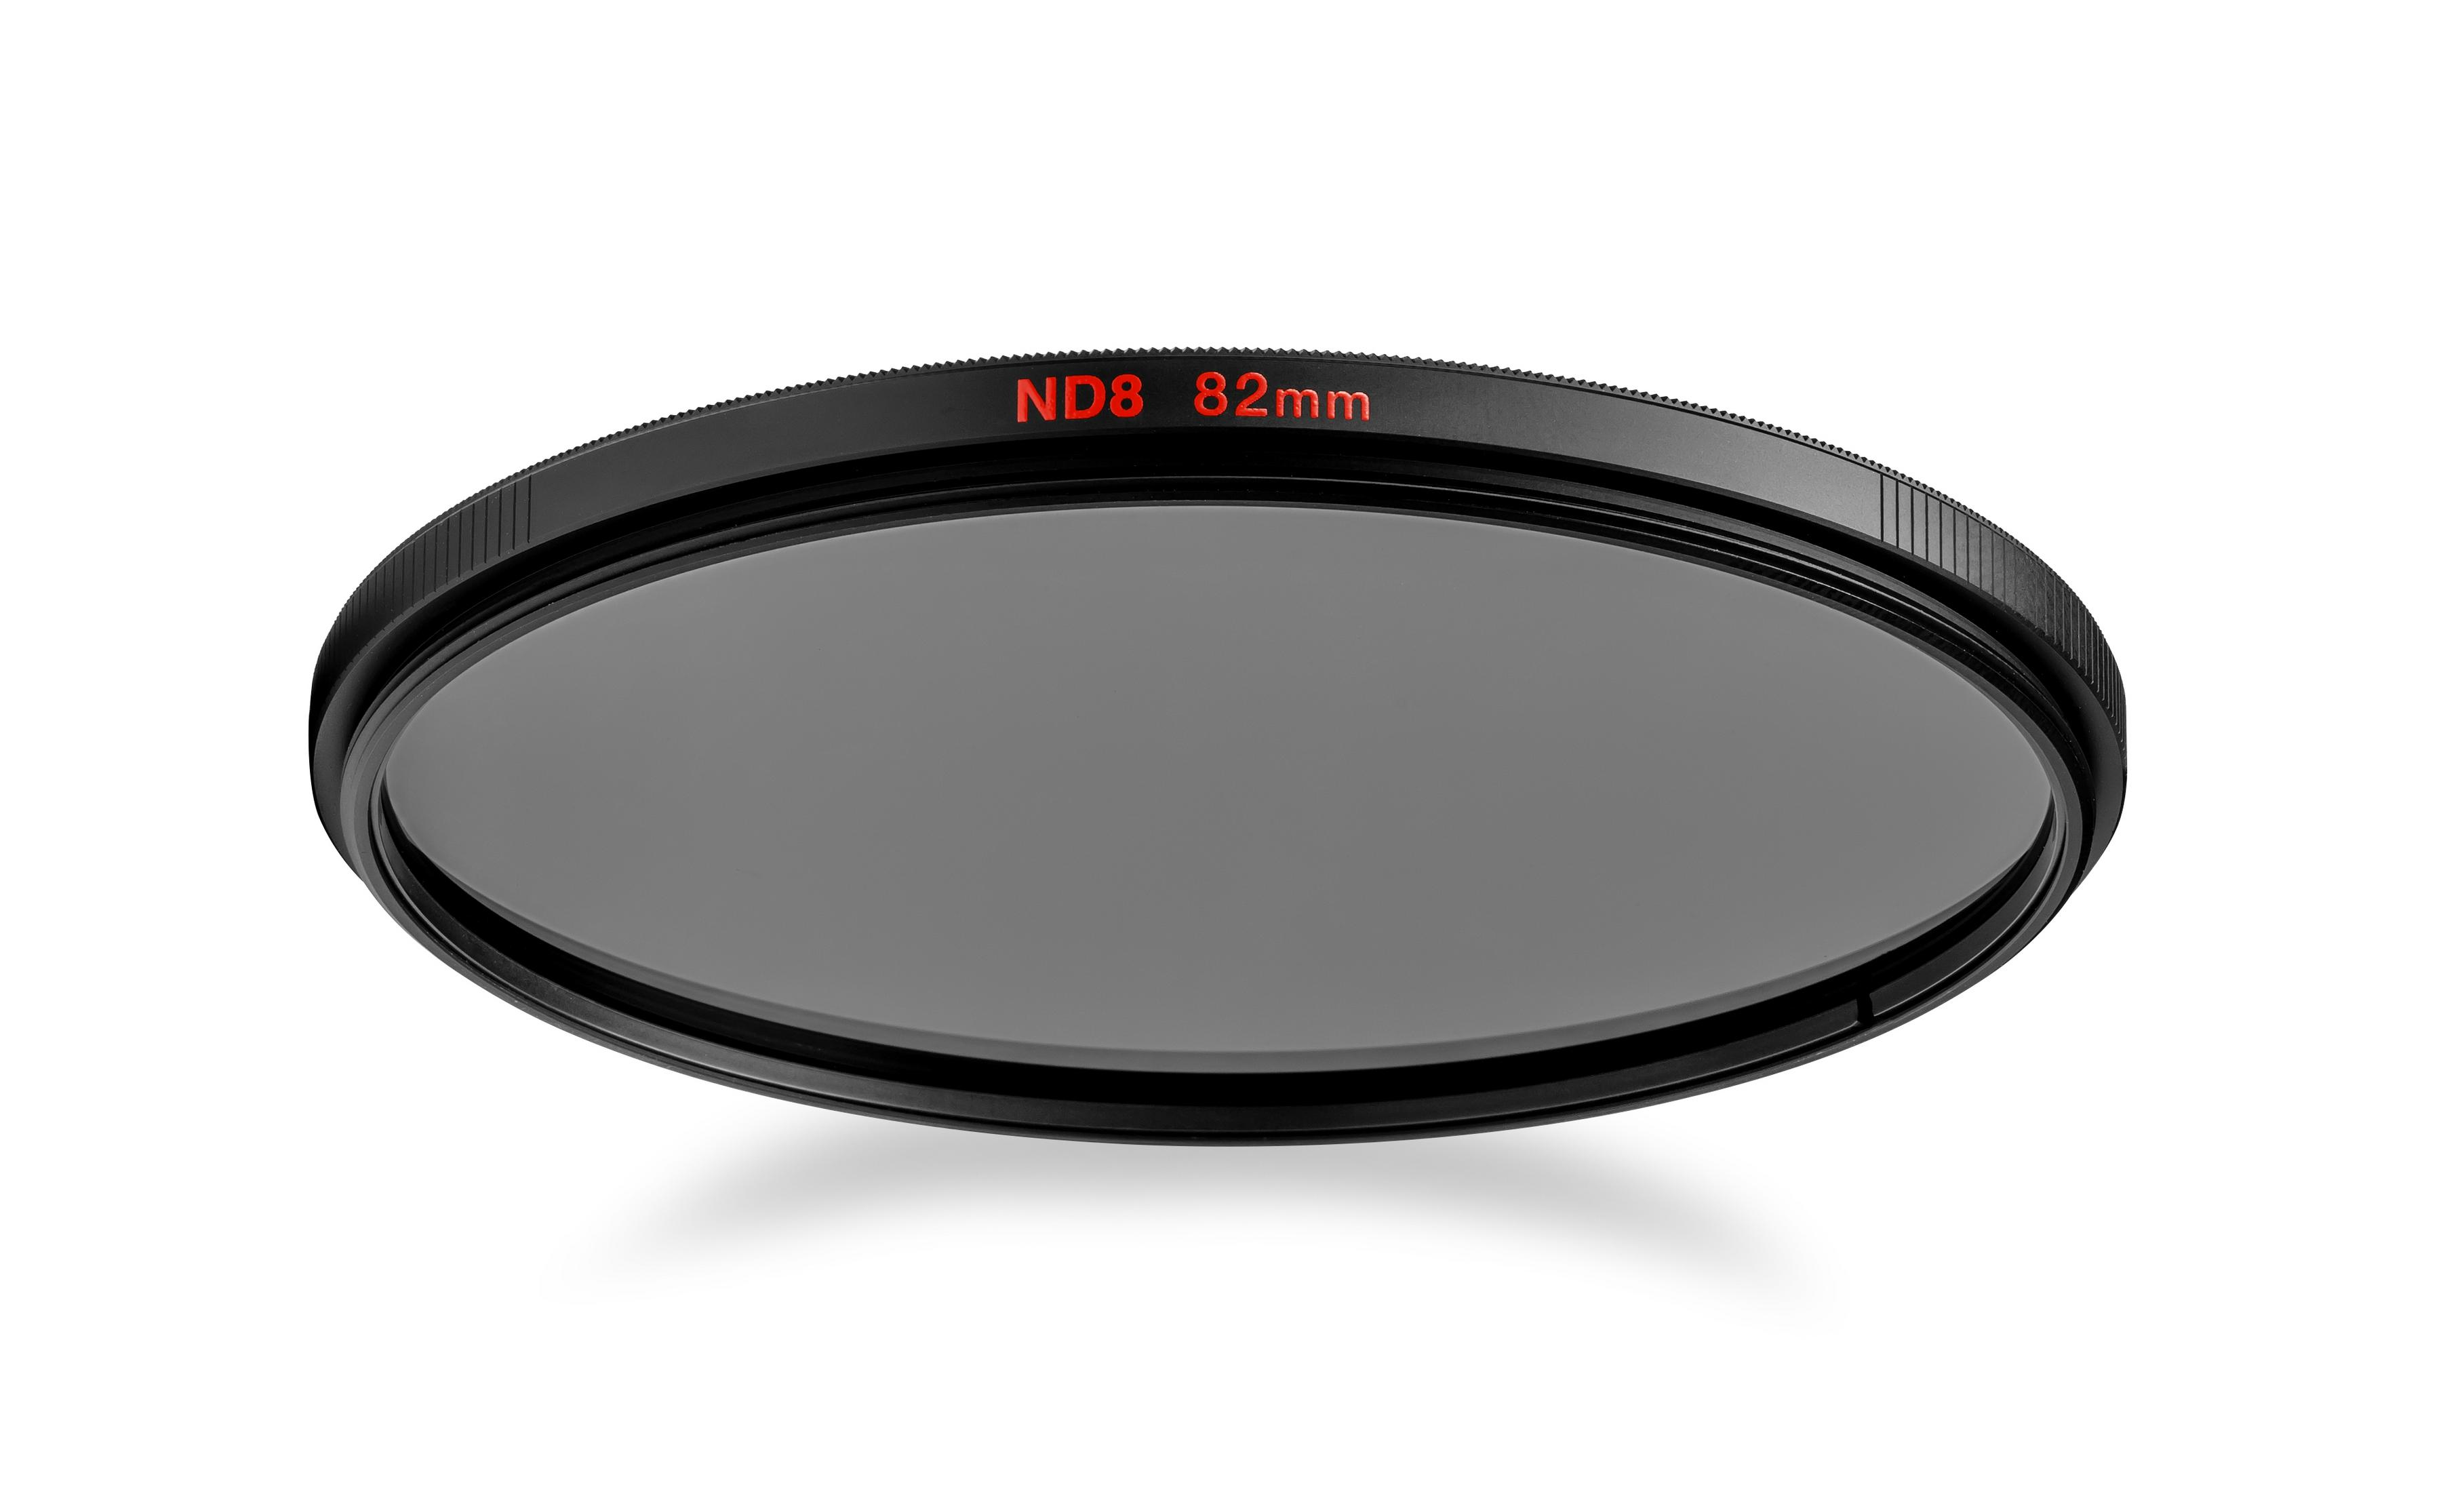 MANFROTTO MFND8-55 RUNDFILTER 55MM Pol-Filter mm 55